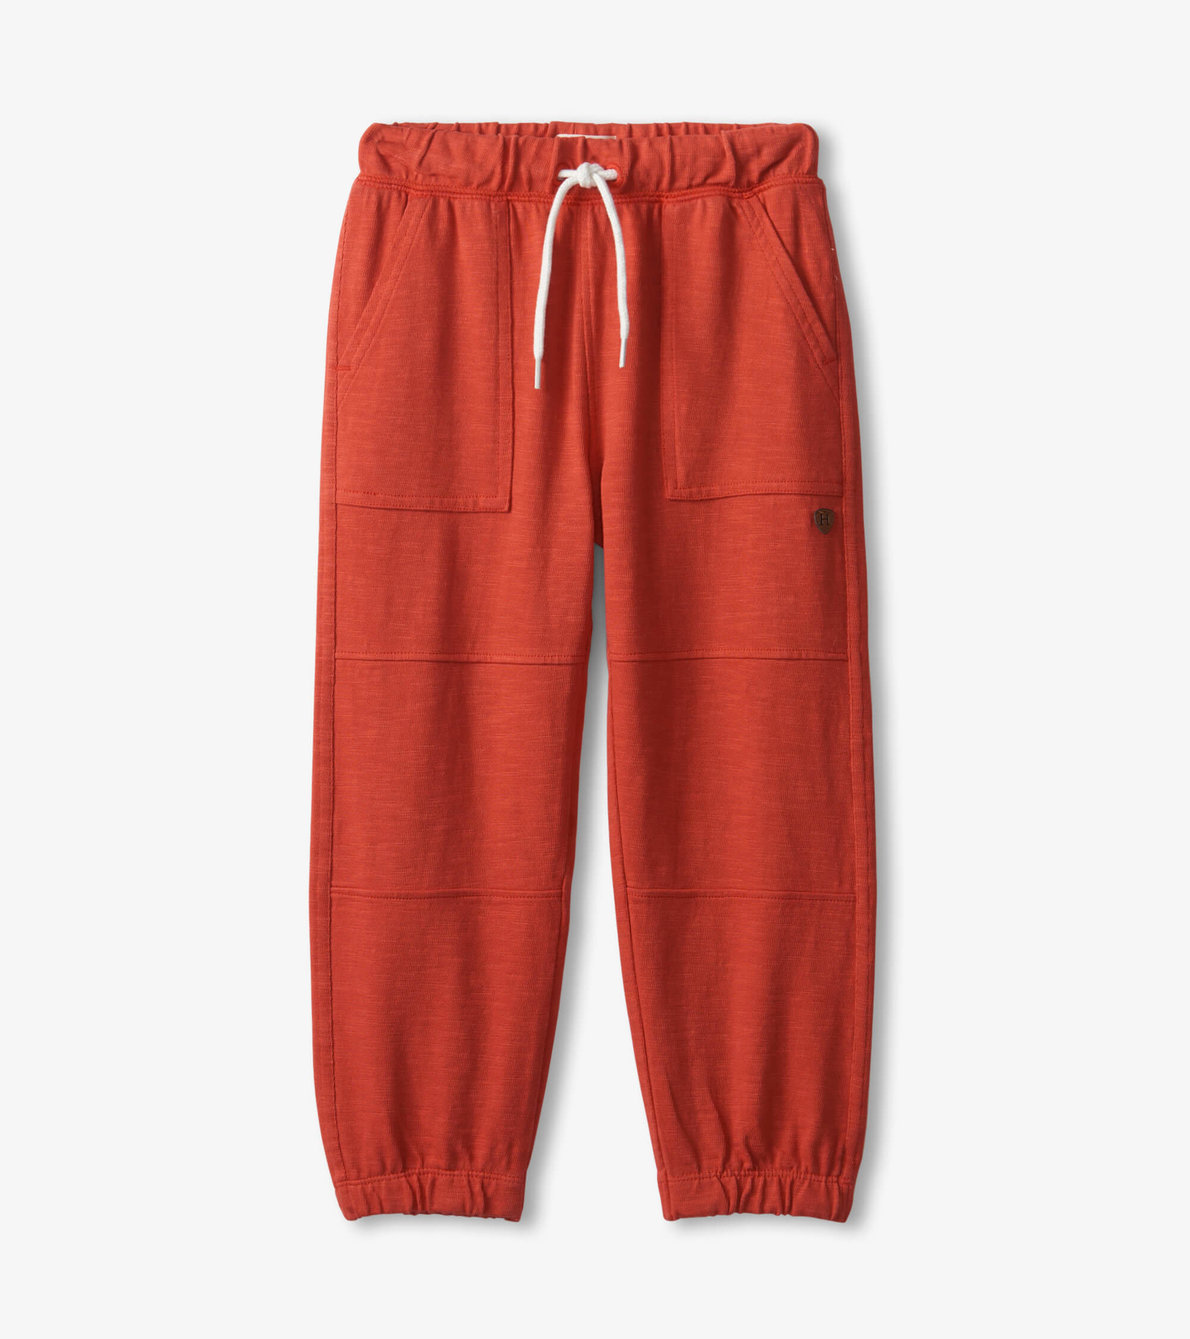 View larger image of Boys Mountain Red Cozy Pants